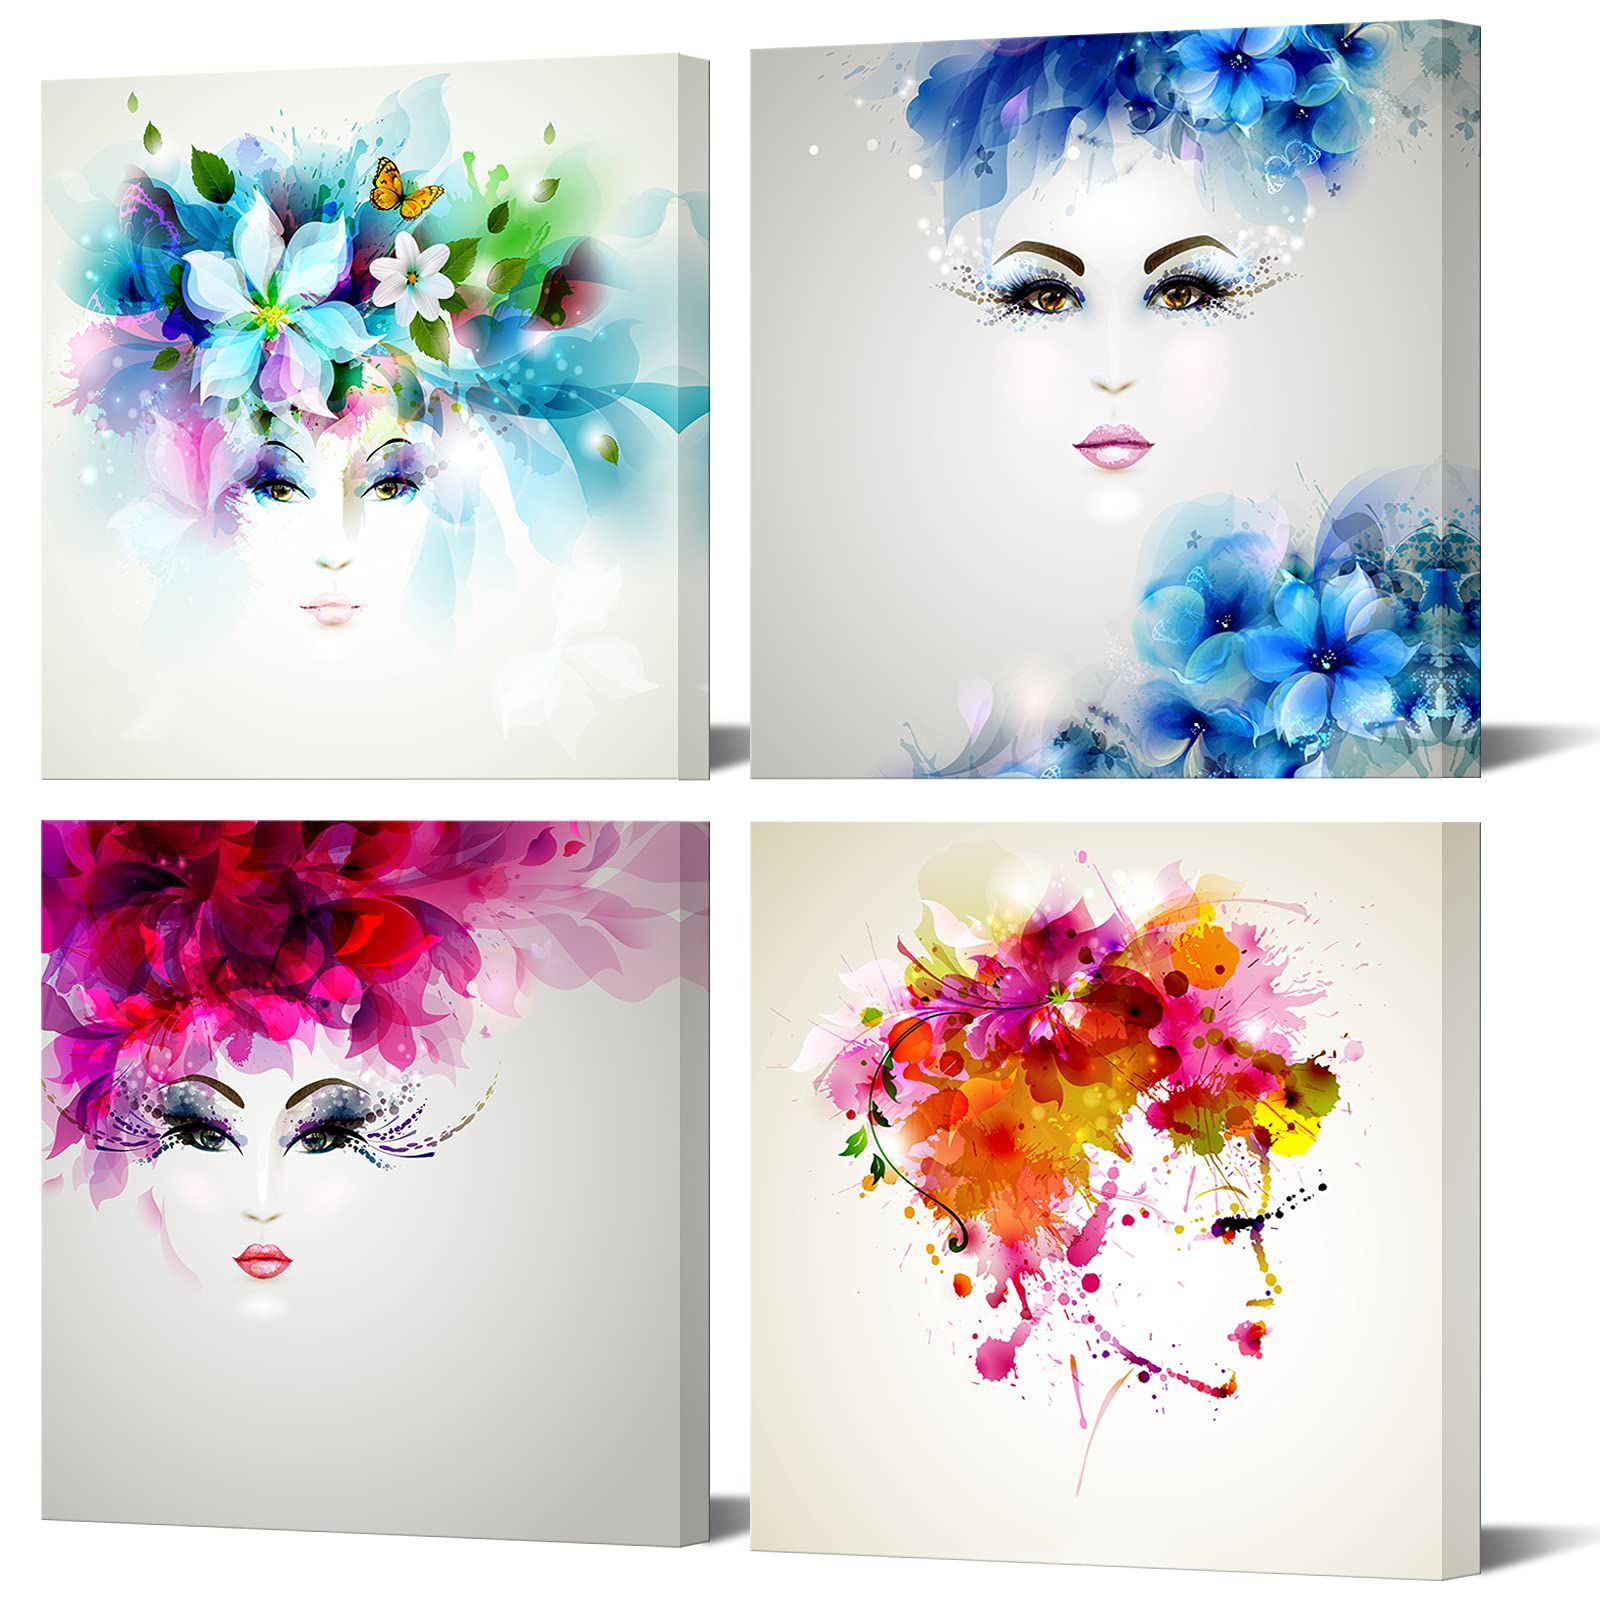 Best And Newest Amazon: Levvarts Creative Abstract Women Face Canvas Prints,beautiful  Flowers And Butterflies In Girl Hair Wall Art,gallery Wrap Artwork Ready To  Hang,modern Home Wall Decor: Posters & Prints Intended For Women Face Wall Art (View 15 of 15)